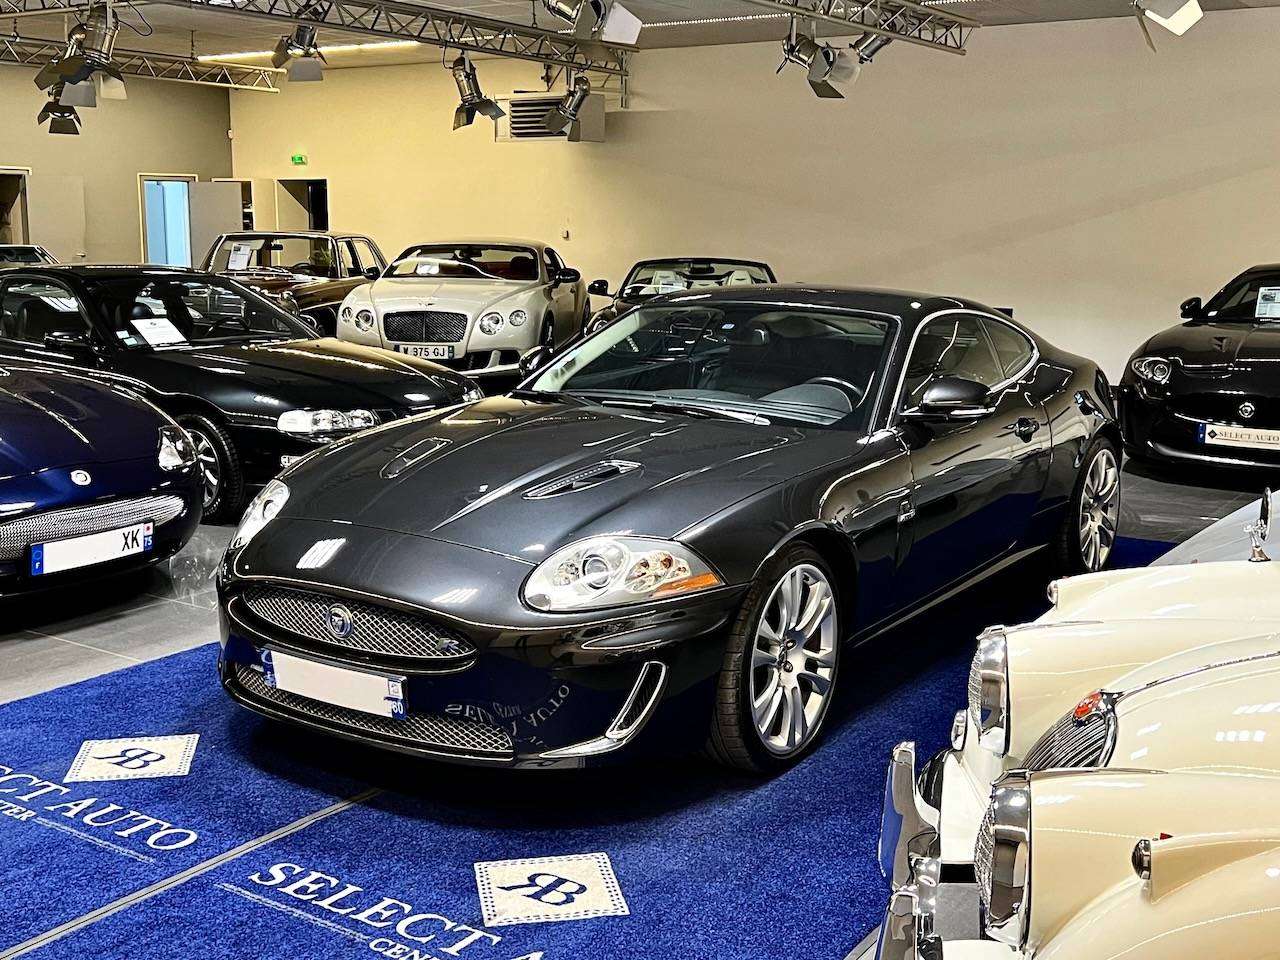 Jaguar XKR Convertible in Grey used in Le Mesnil en Thelle for € 42,000.-